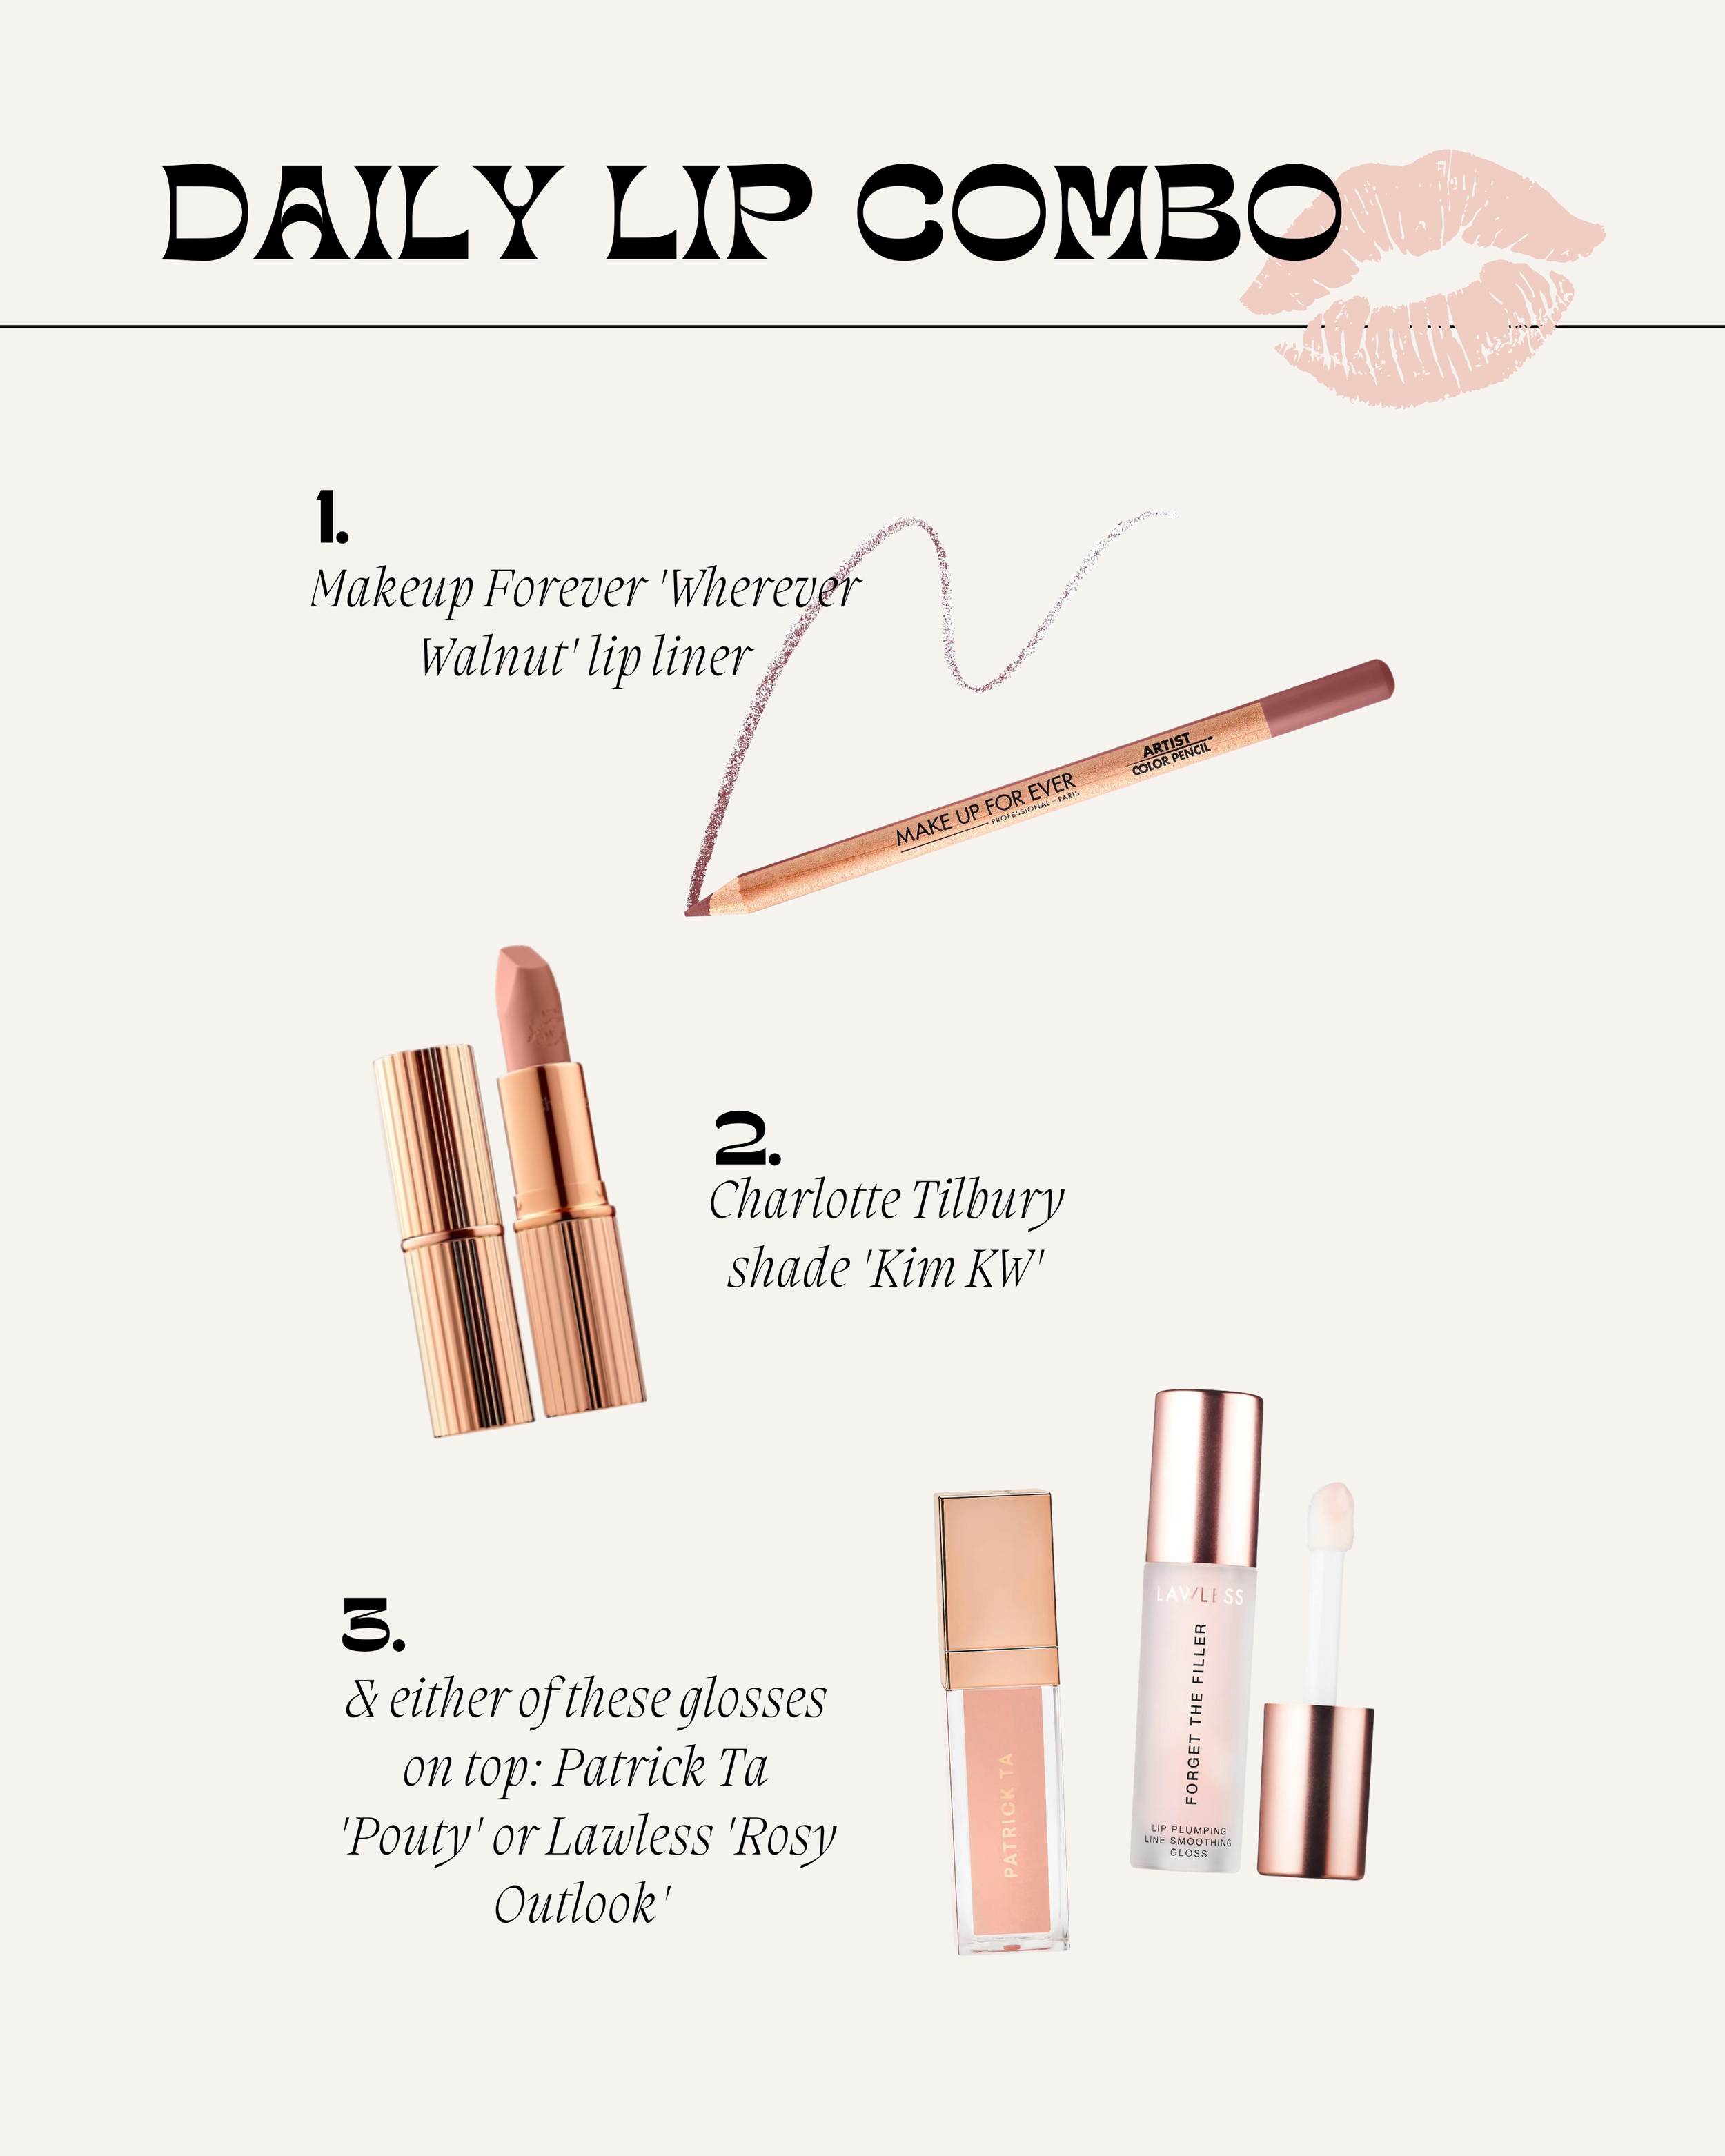 I wear a version of this lip combo pretty much every day - a perfect neutral lip - BRESHEPPARD.COM, daily lip combo.png